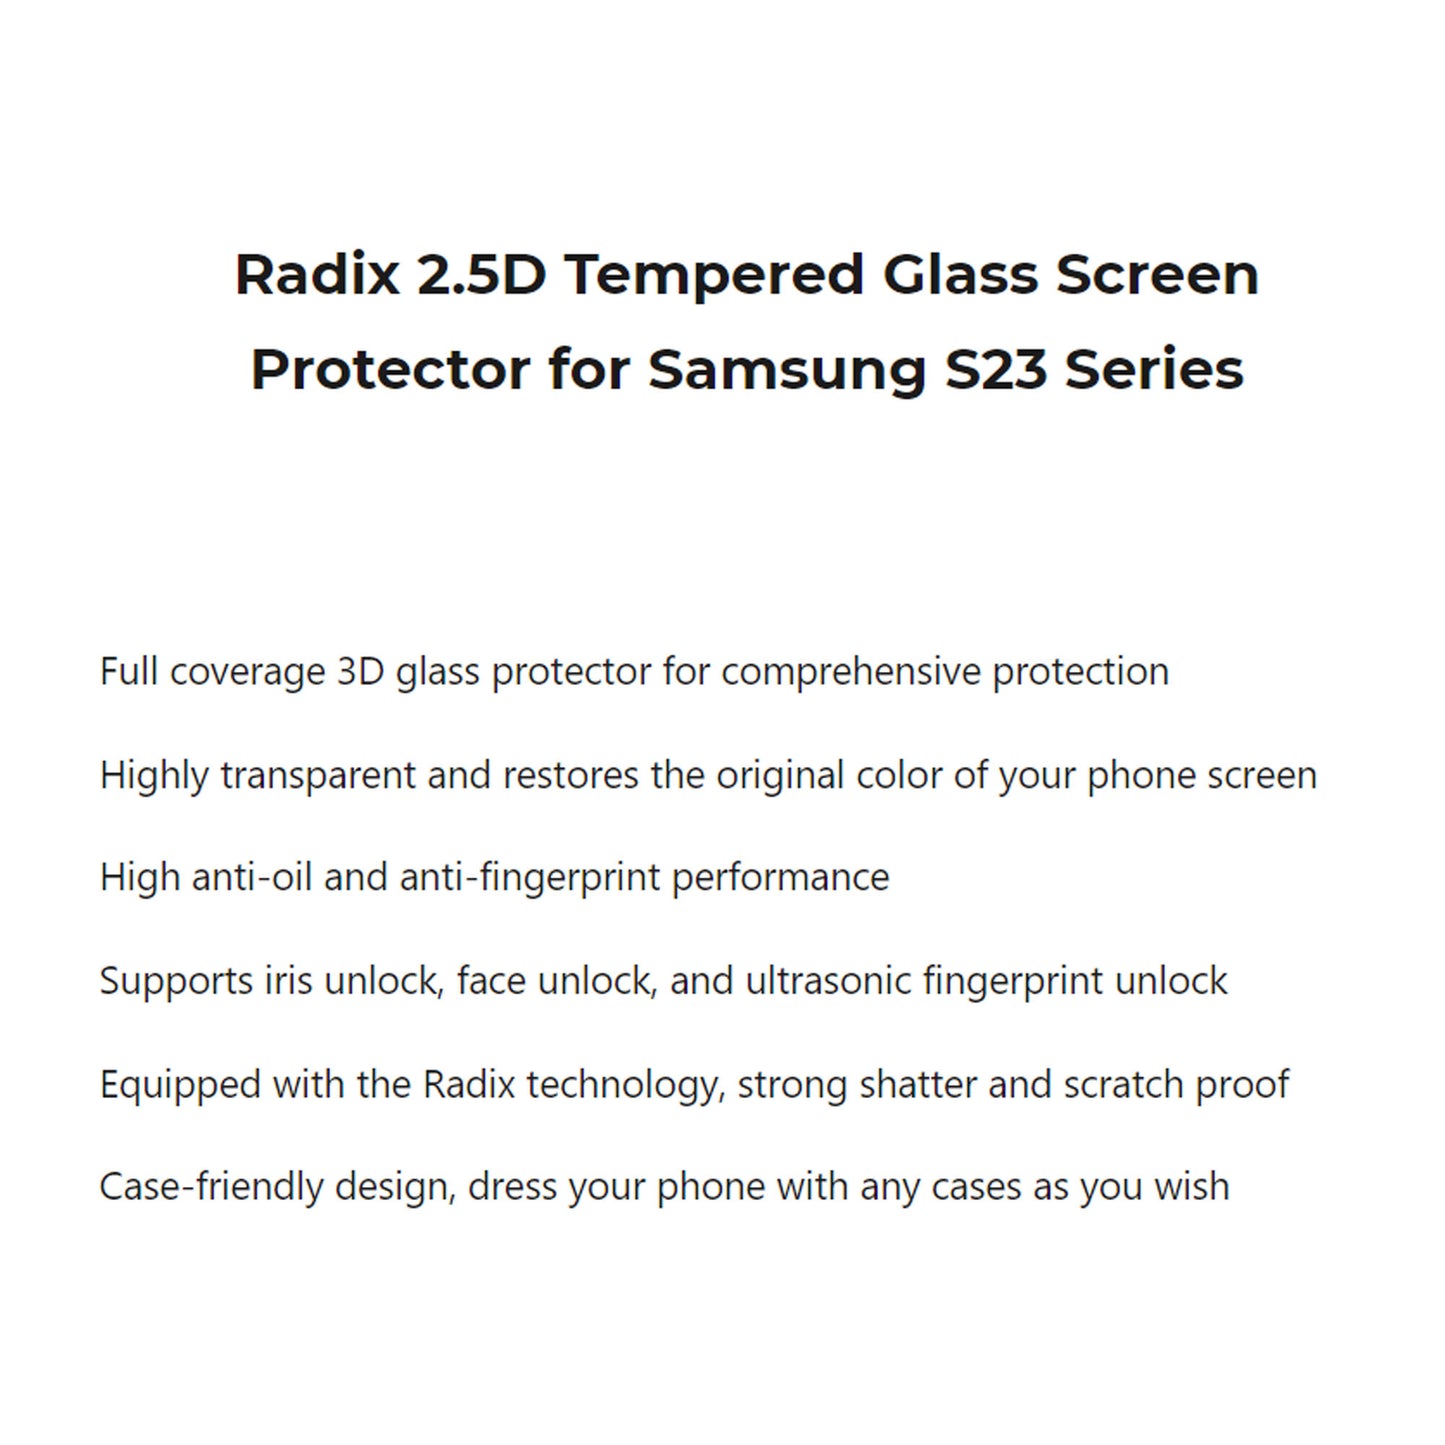 AMAZINGTHING Radix Tempered Glass for Samsung Galaxy S23 - Side Glue Screen Protector - Clear (Barcode: 4892878078214 )